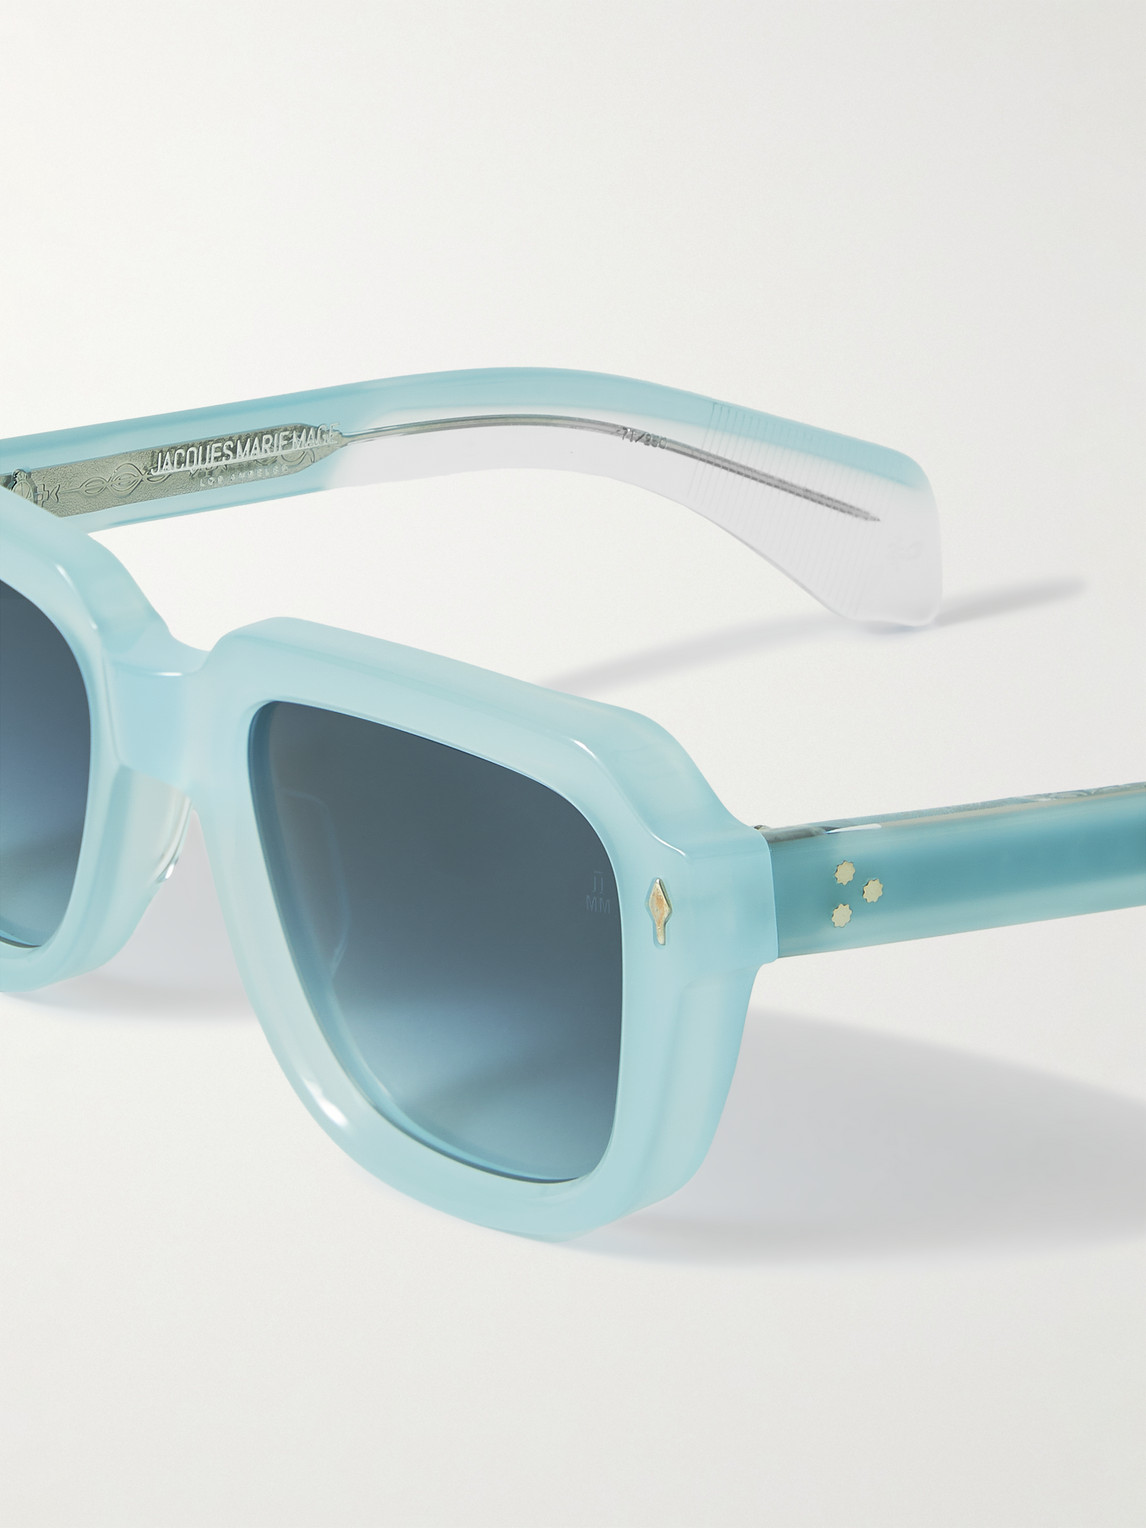 Shop Jacques Marie Mage Taos Square-frame Acetate Sunglasses In Blue